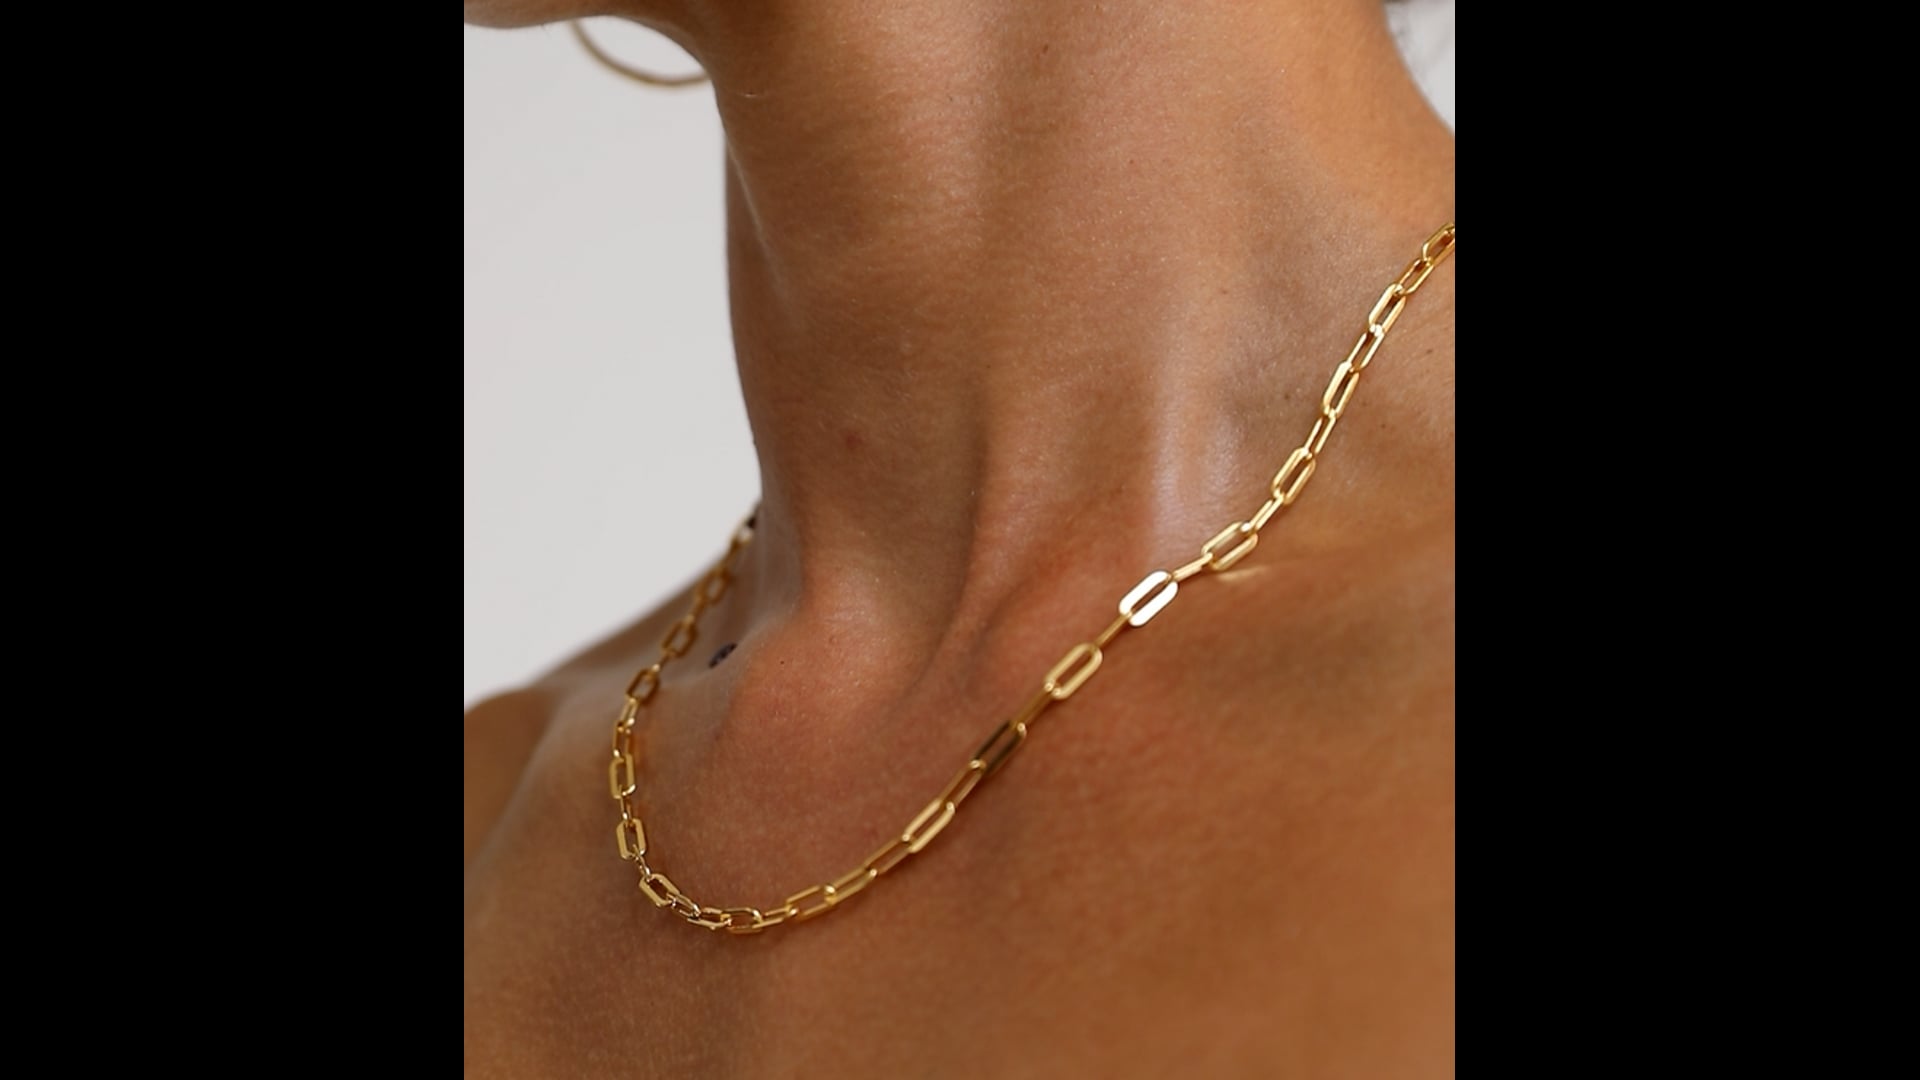 Necklace Vinader Sterling | Adjustable Chain in Paperclip Jewellery 50cm/20\' by Monica Silver